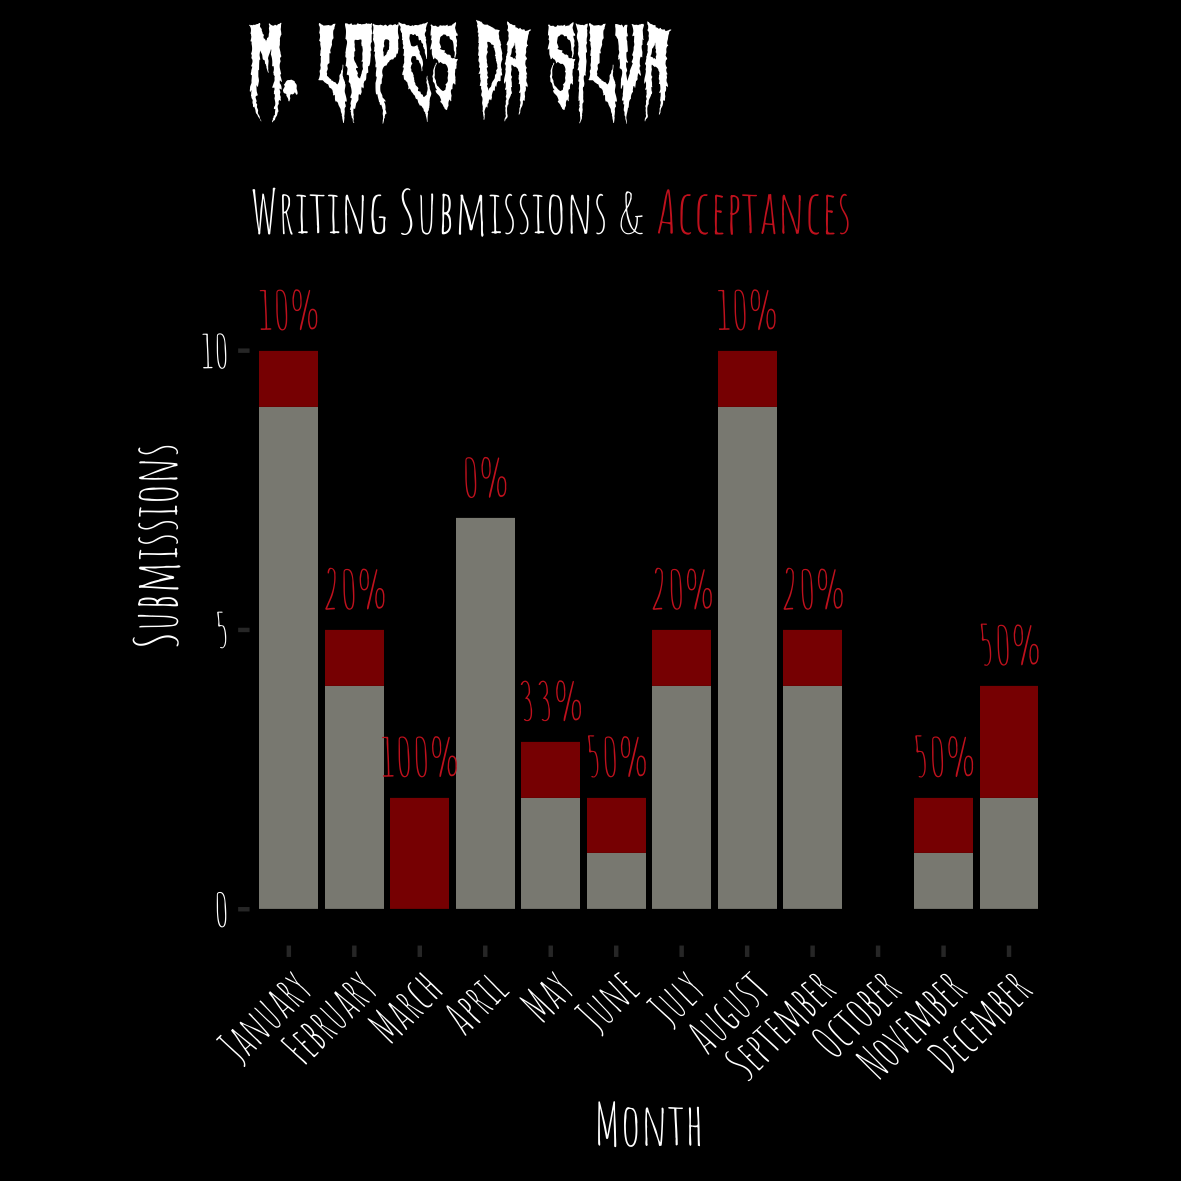 A bar chart with black background, white and red text, and gray and red stacked bars. The overall title reads: M. Lopes da Silva. The subtitle reads: Writing Submissions and Acceptances. The x axis reads: Month (with tick labels for each calendar month). The y label reads: Submissions (with ticks for 0, 5, and 10). The data for each month is: January, 10 submissions, 10% acceptance; February, 5 and 20%; March, 2 and 100%; April, 7 and 0%; May, 2 and 33%; June, 2 and 50%; July, 5 and 20%; August, 10 and 10%; September, 5 and 20%; October, 0 and 0%; November, 2 and 50%; December, 4 and 50%.